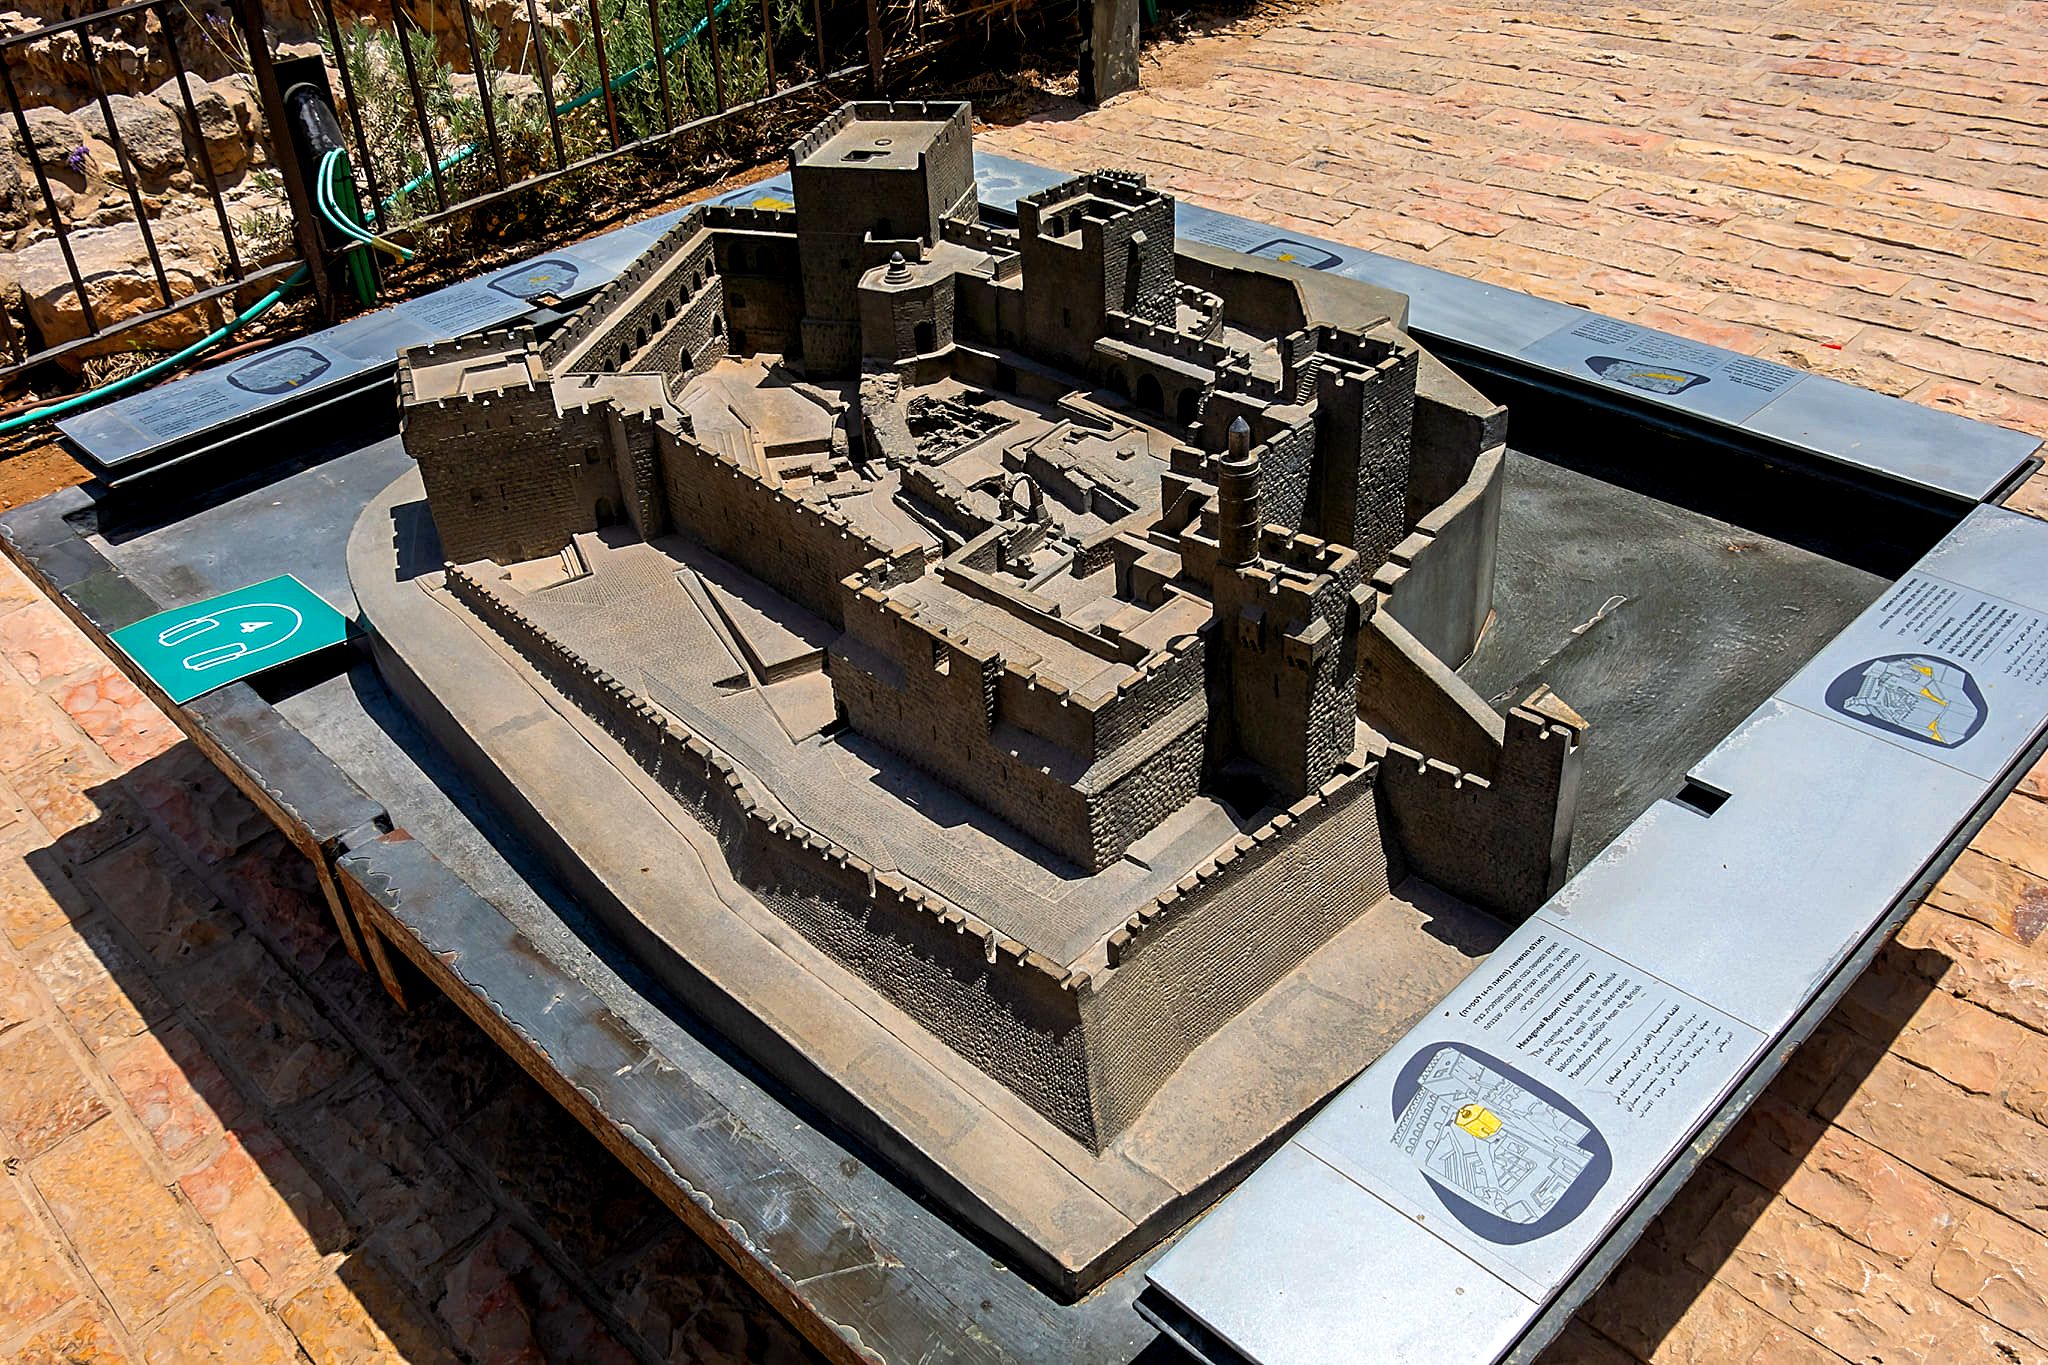 The 1:100 scale aluminum model of the Jerusalem Citadel, Tower of David Museum of the History of Jerusalem.